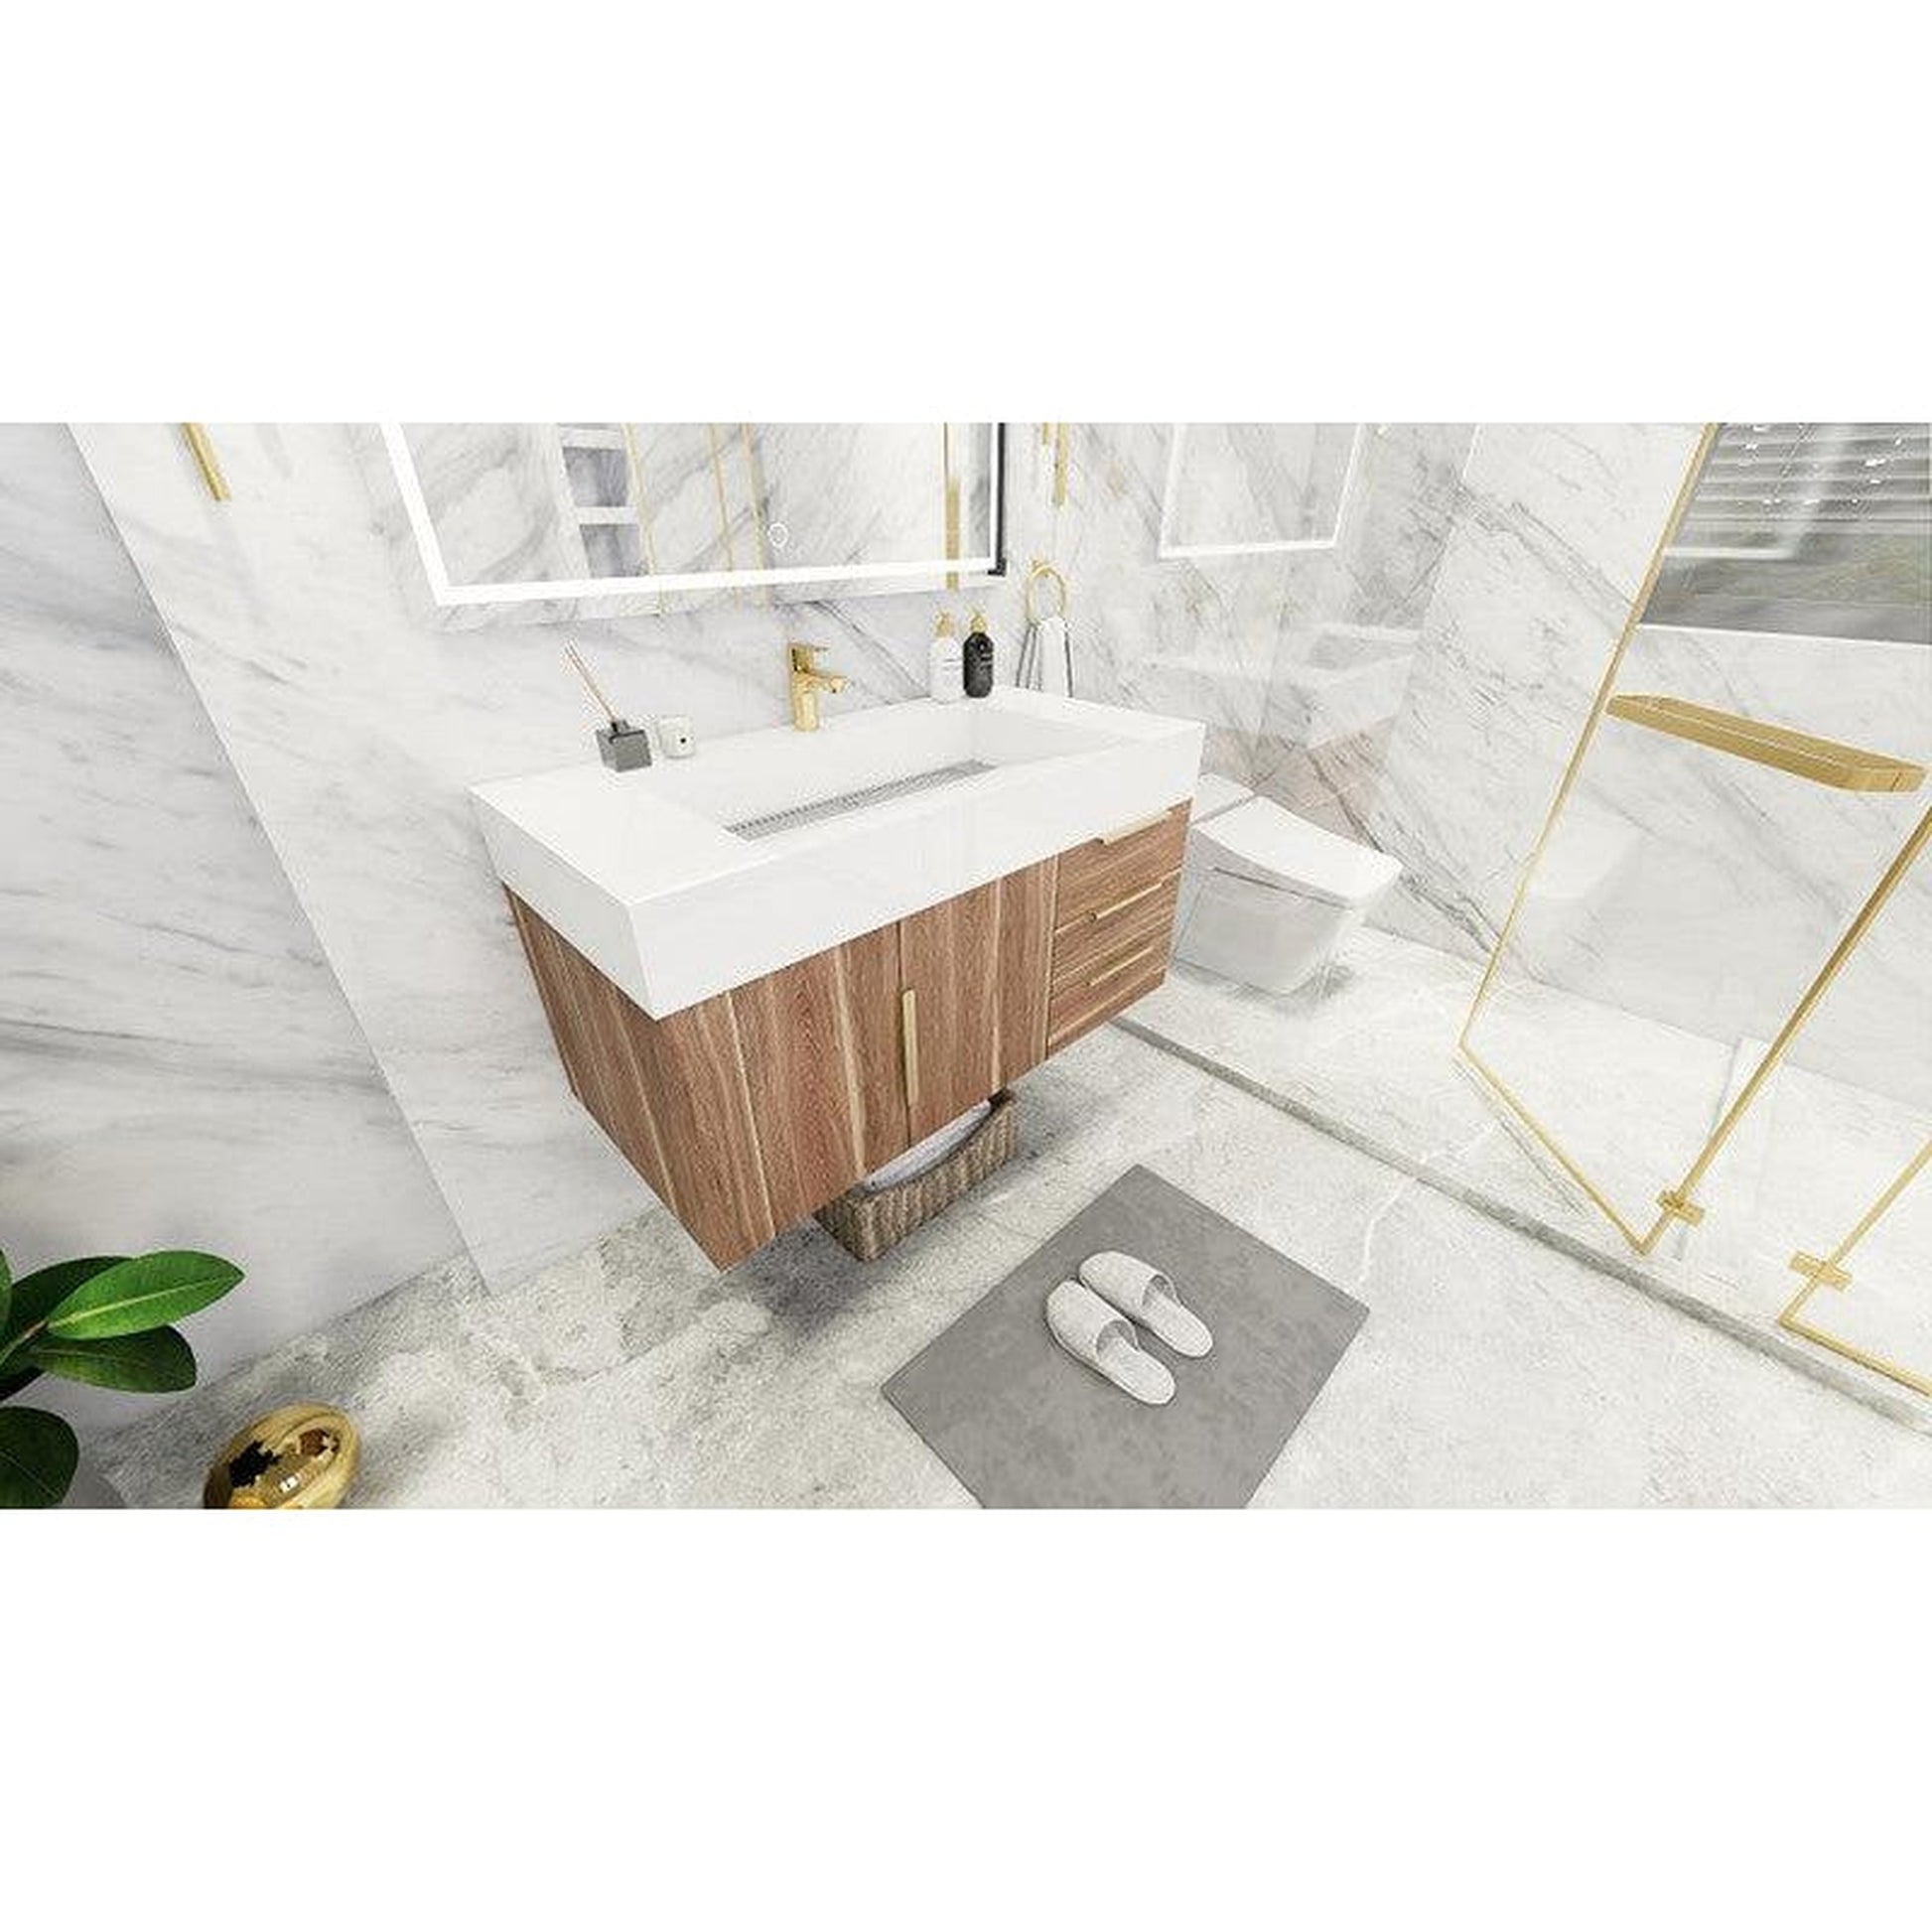 Moreno Bath Bethany 42" White Oak Wall-Mounted Vanity With Right Side Drawers and Single Reinforced White Acrylic Sink